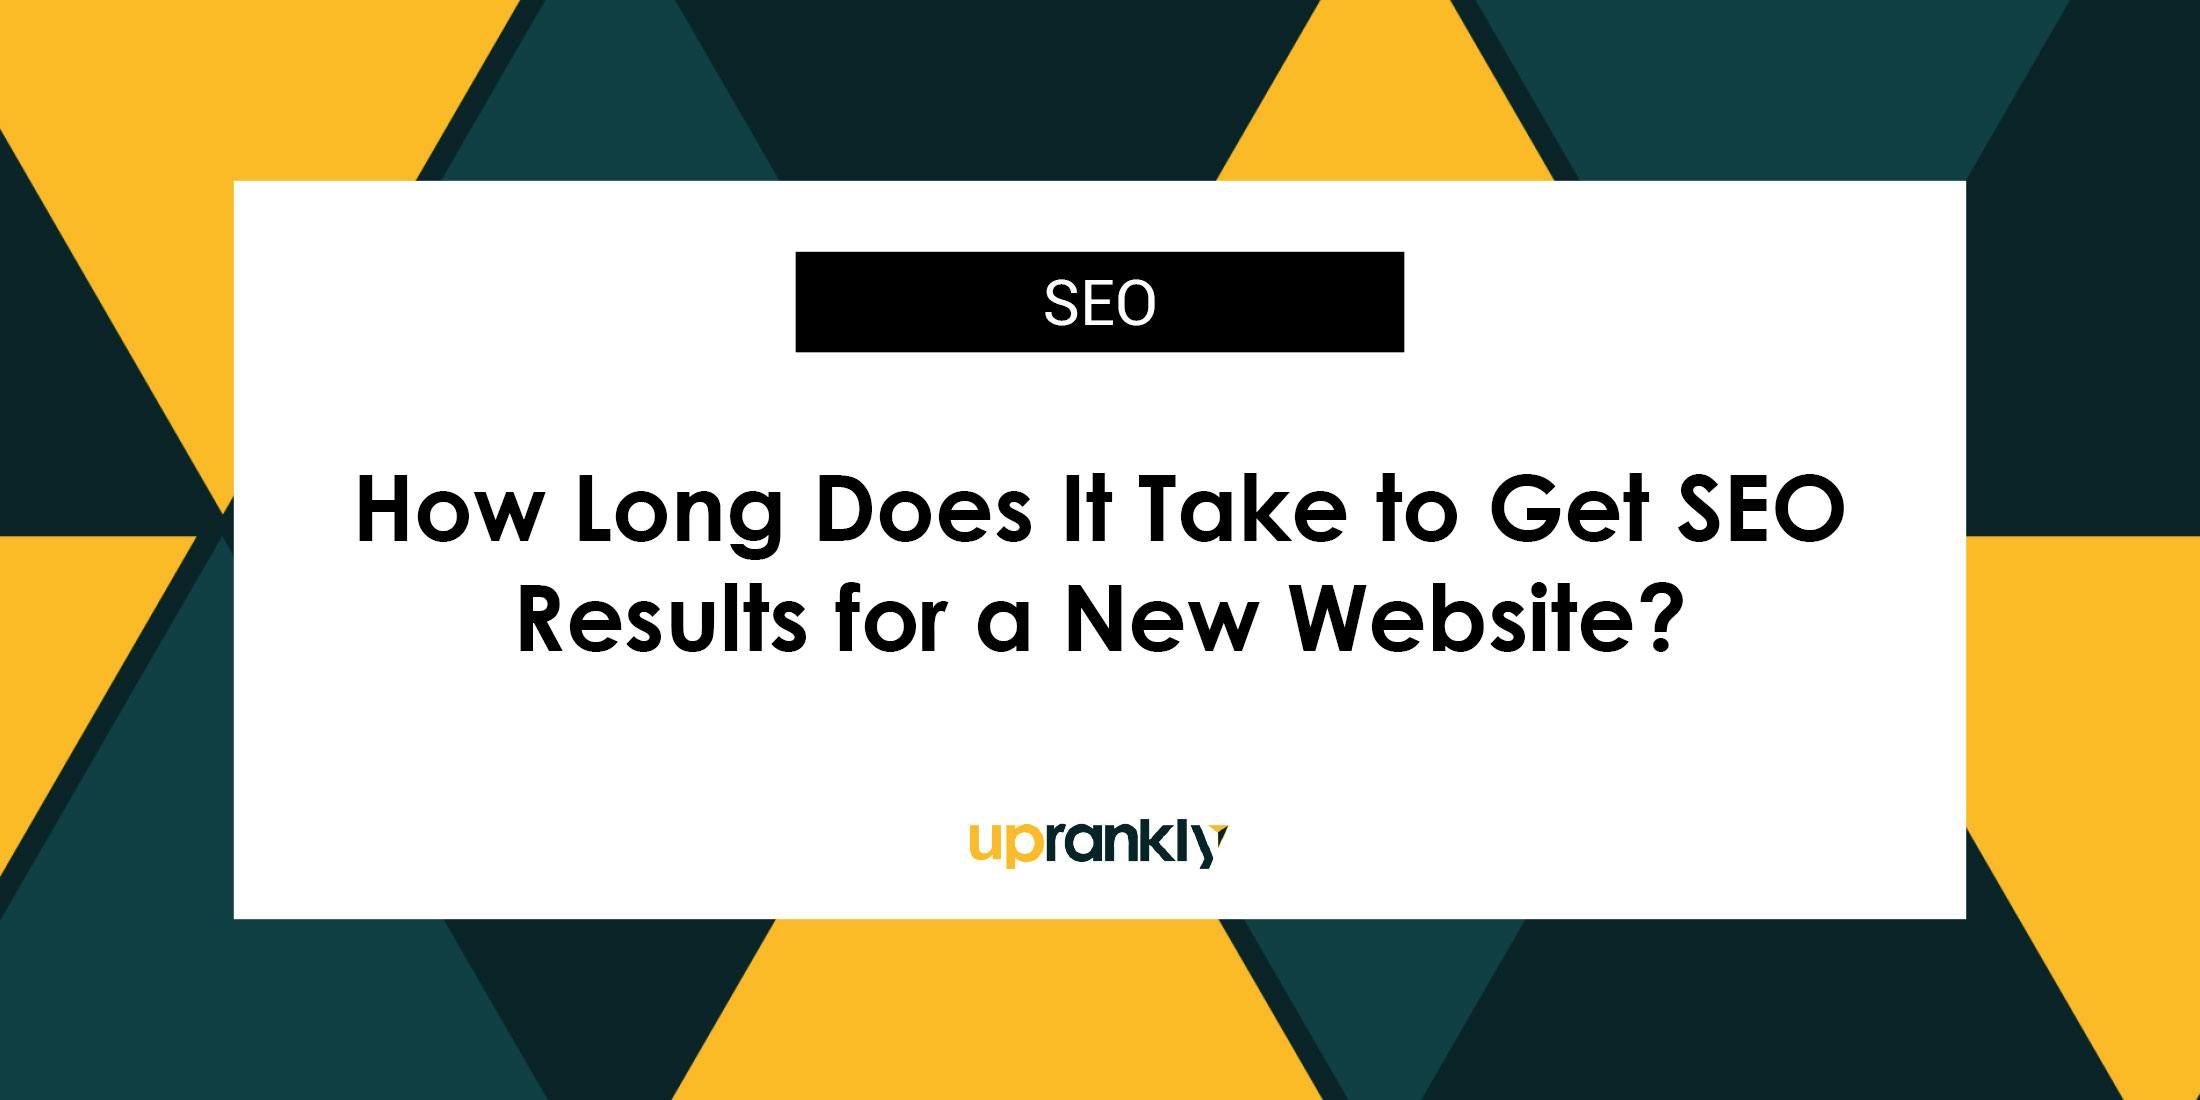 How Long Does It Take to Get Seo Results for a New Website?